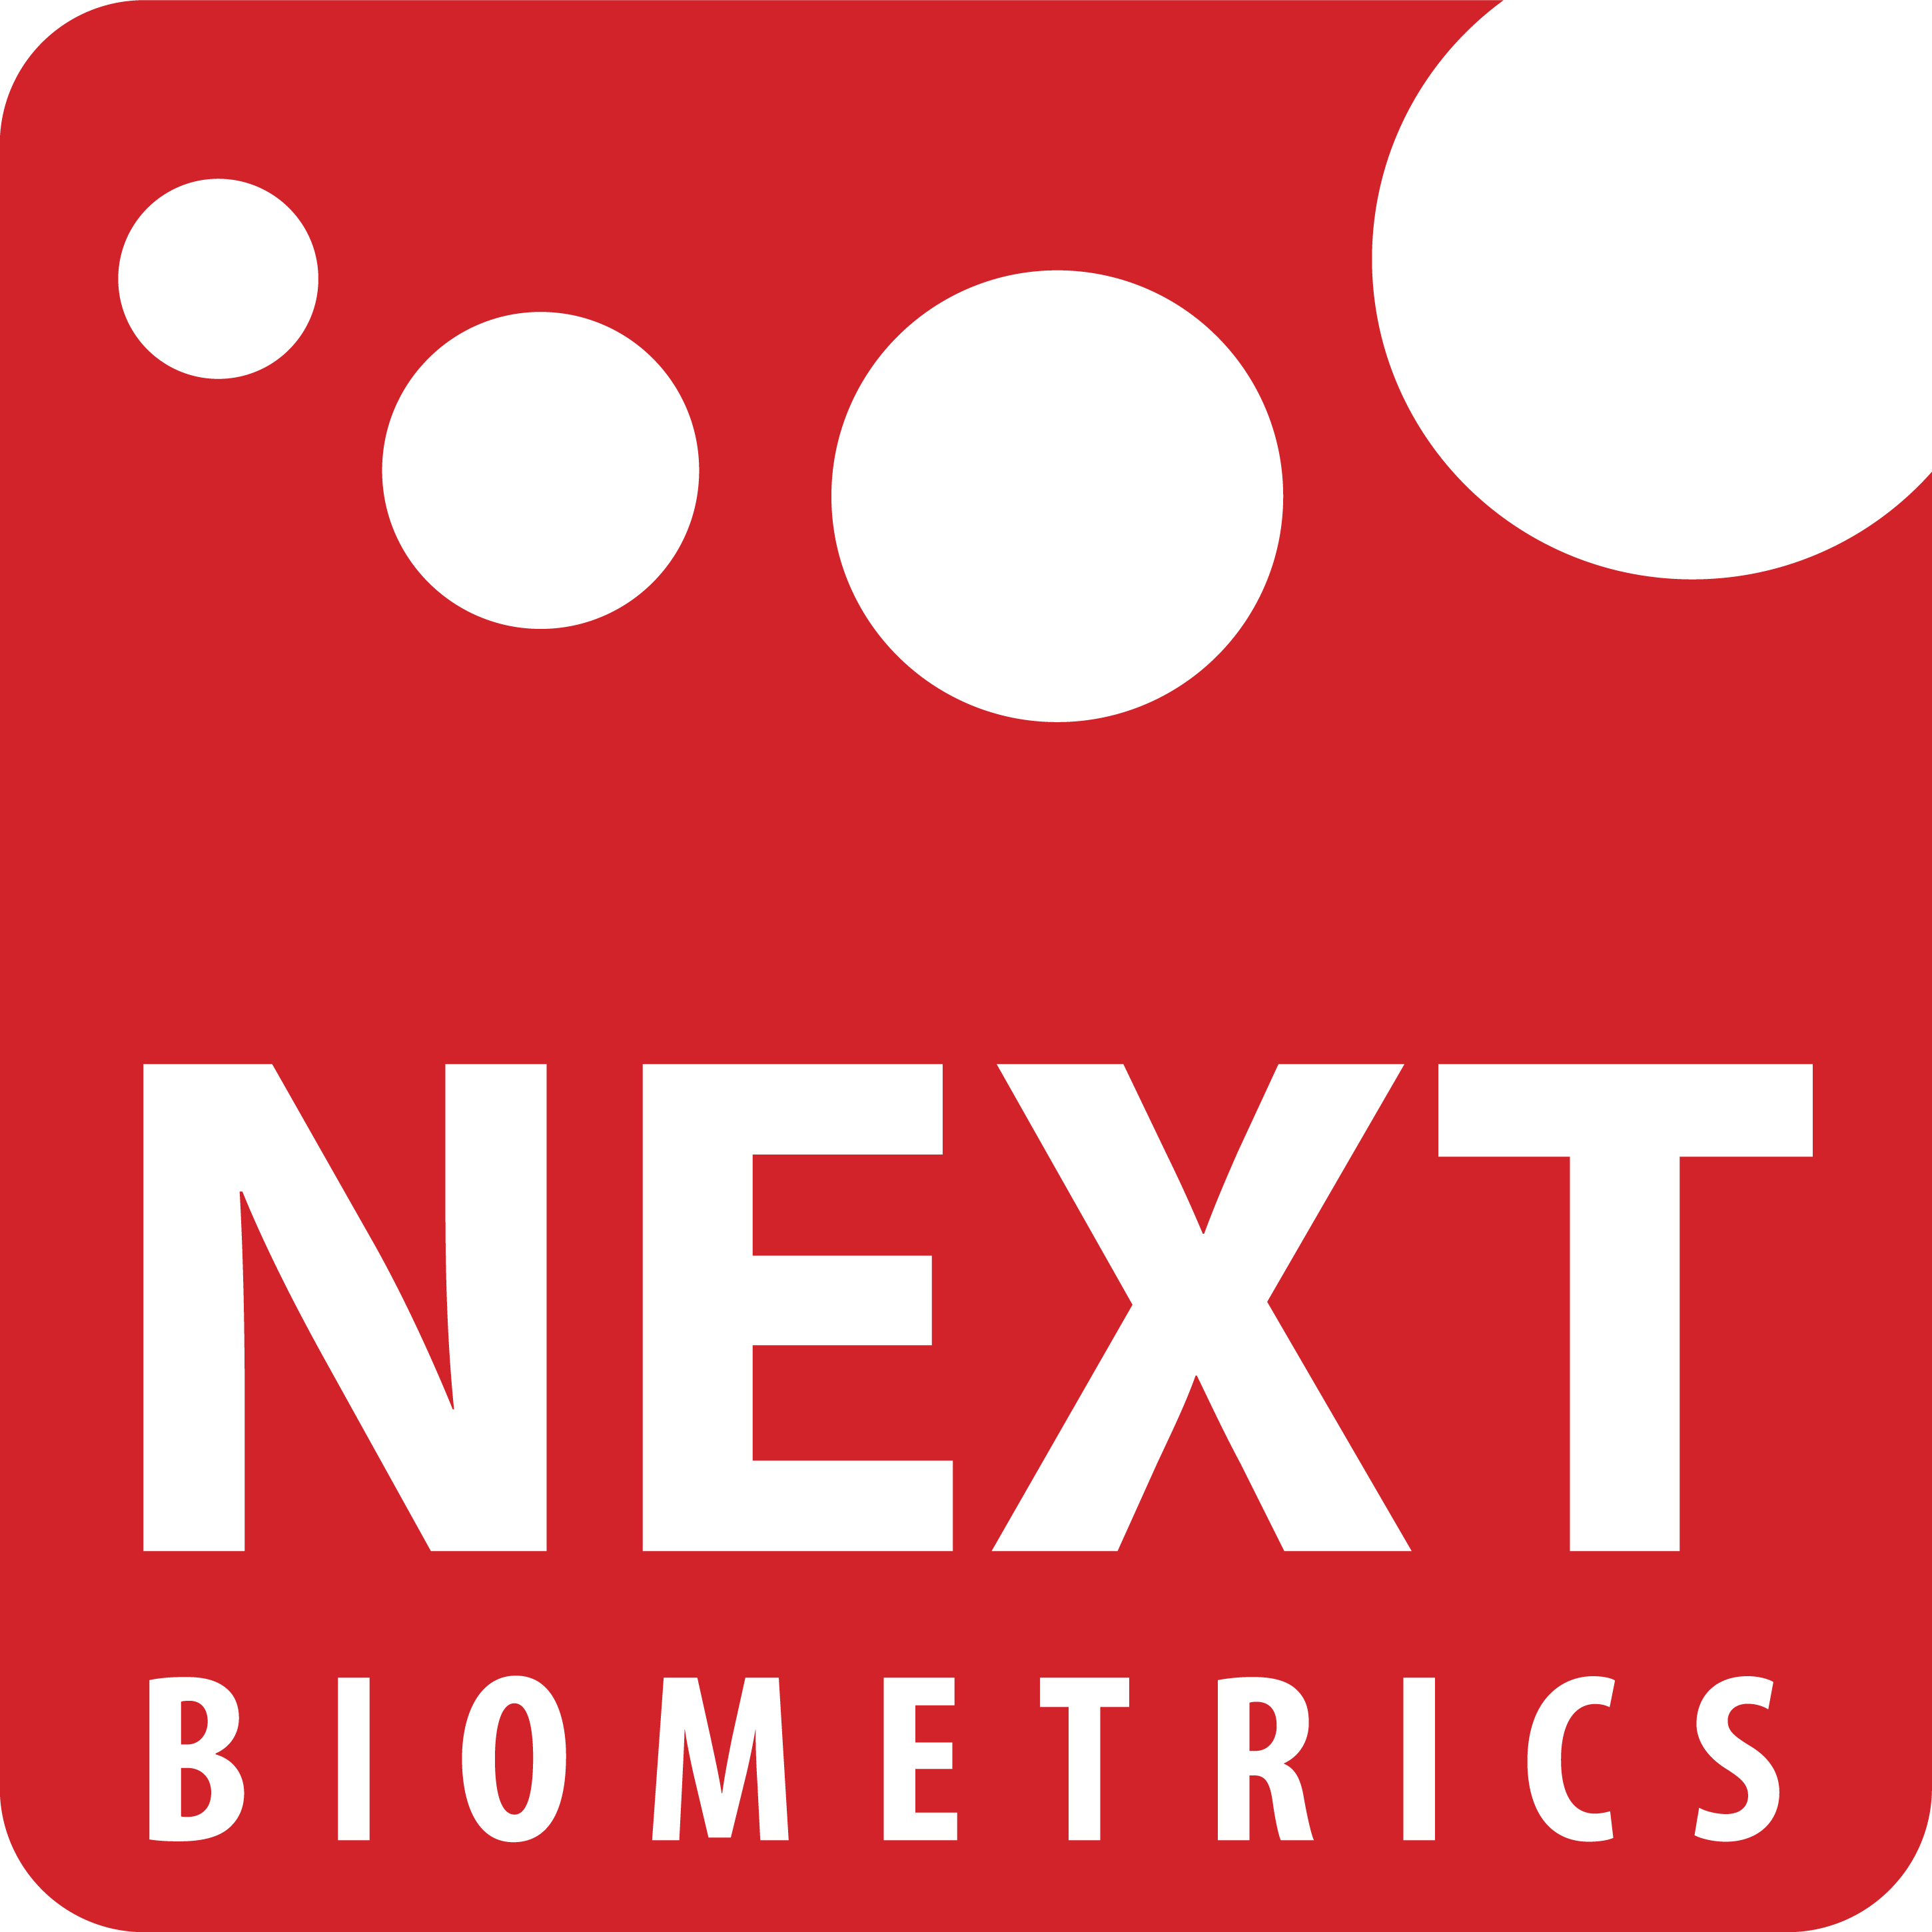 NEXT Biometrics, headquartered in Oslo, Norway, offers high quality area fingerprint sensor at a fraction of the prices of comparable competitors.